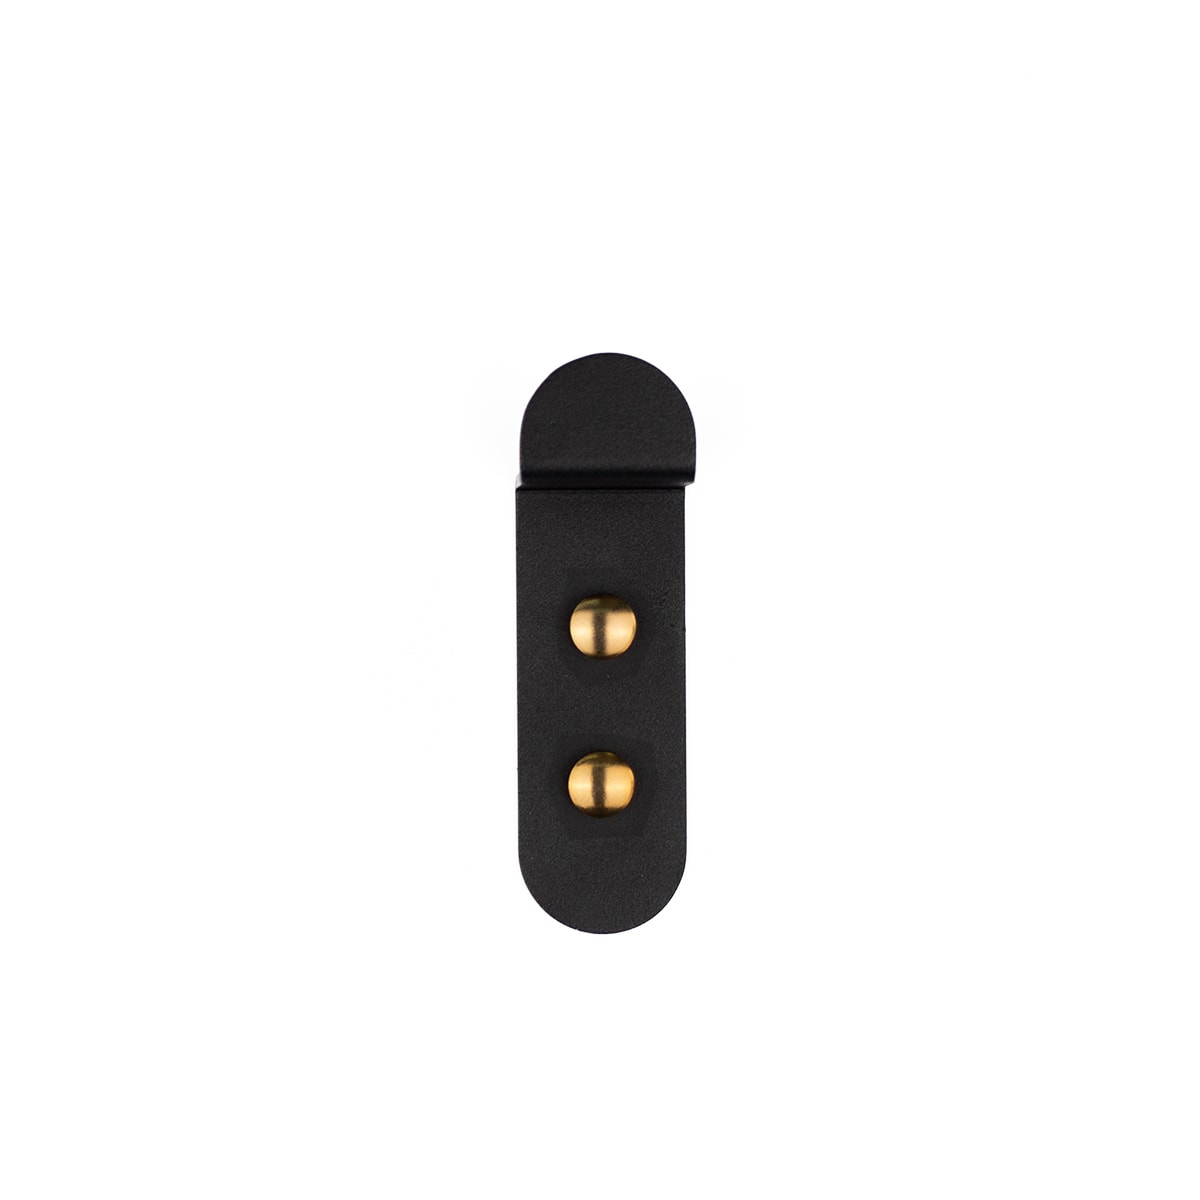 Modest Wall Hook - Black - Front View by RJ Living